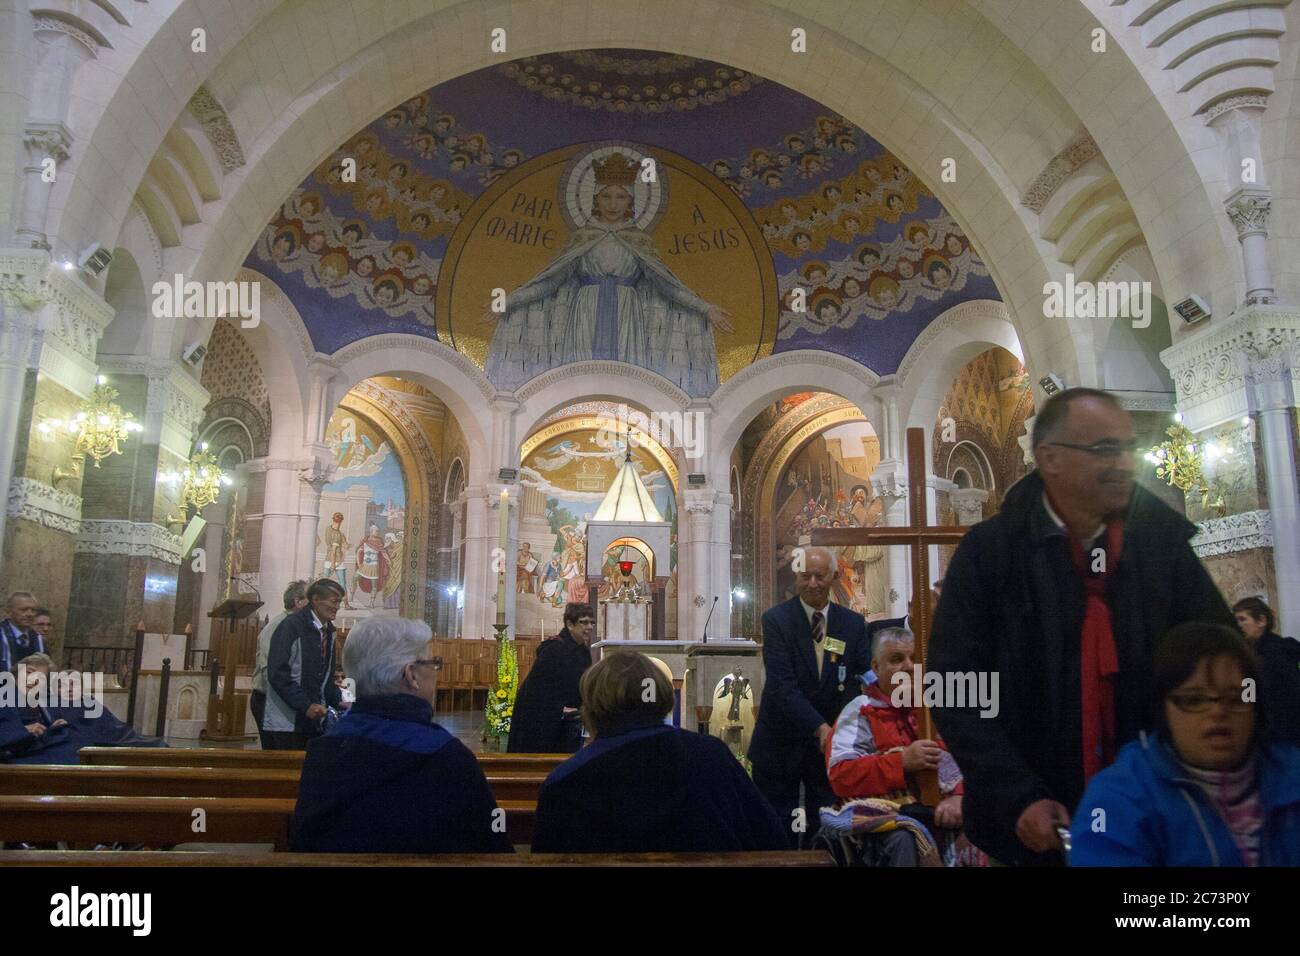 Apr 28. 2014 Lourdes France Through Mary to Jesus. Disabled people in wheelchair hope miracouolus healing. Monumental mosaic murals in Rosary Basilica Stock Photo